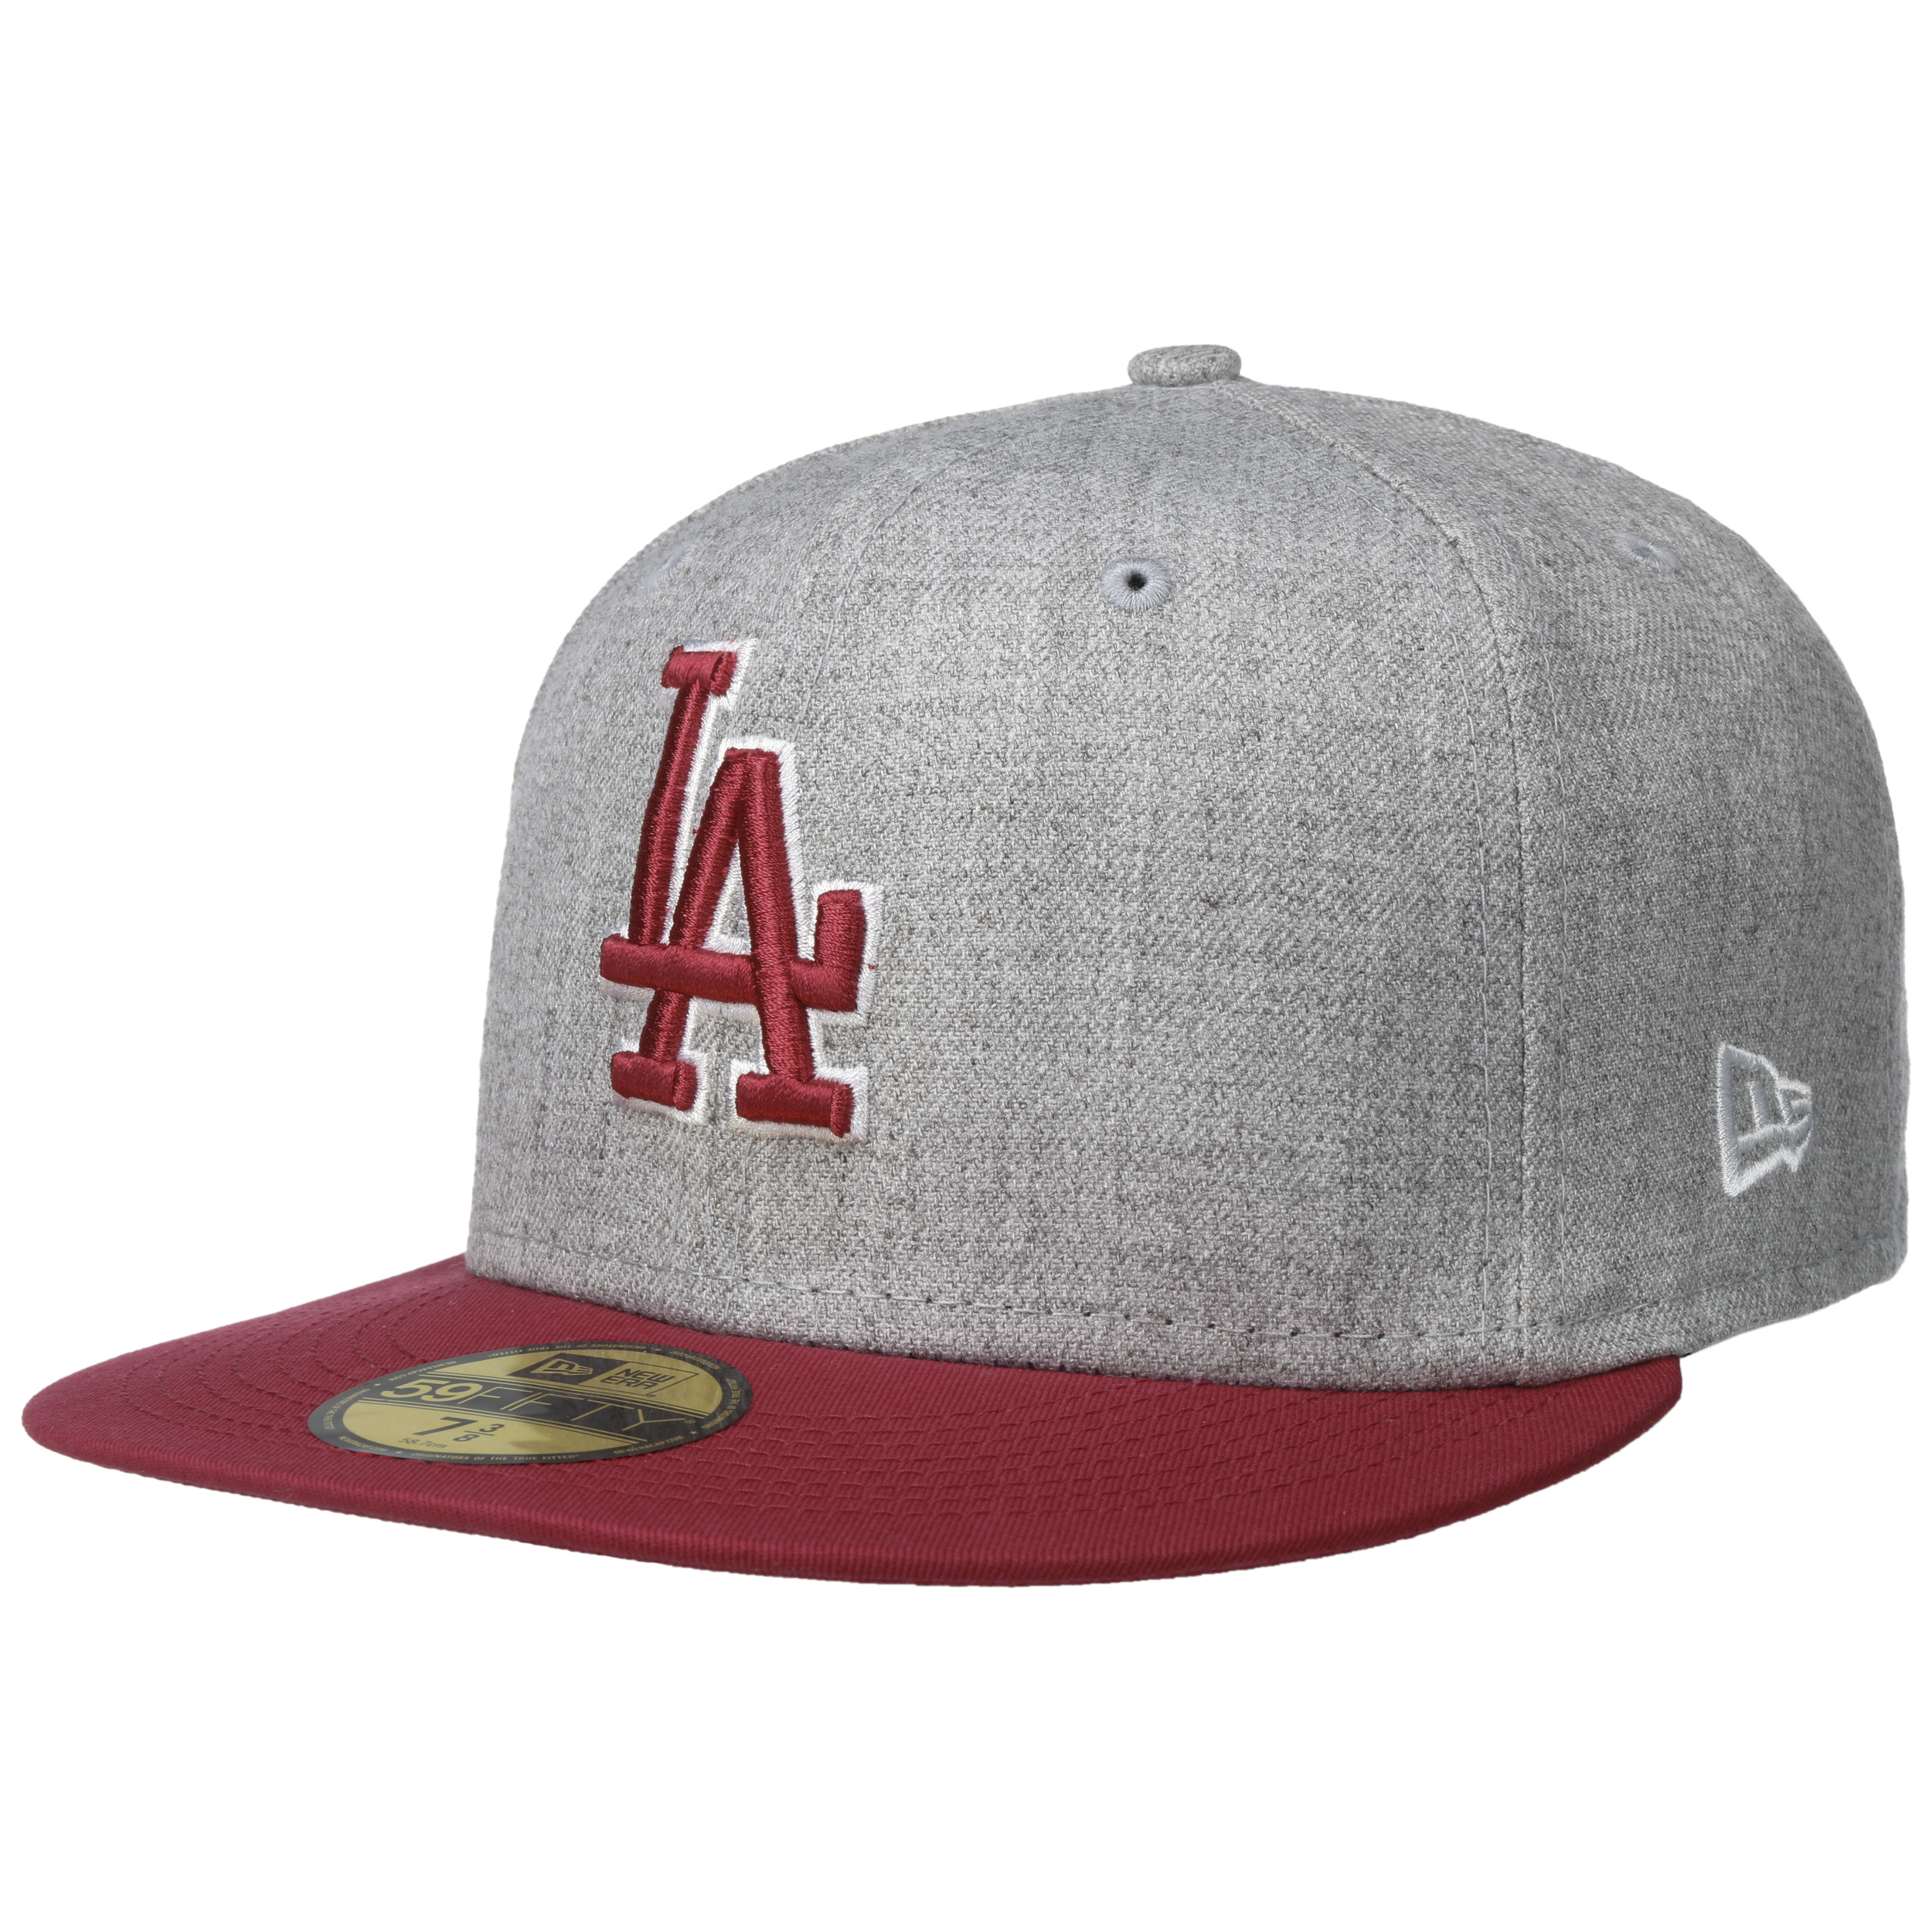 59Fifty Heather Contrast Dodgers Cap by New Era